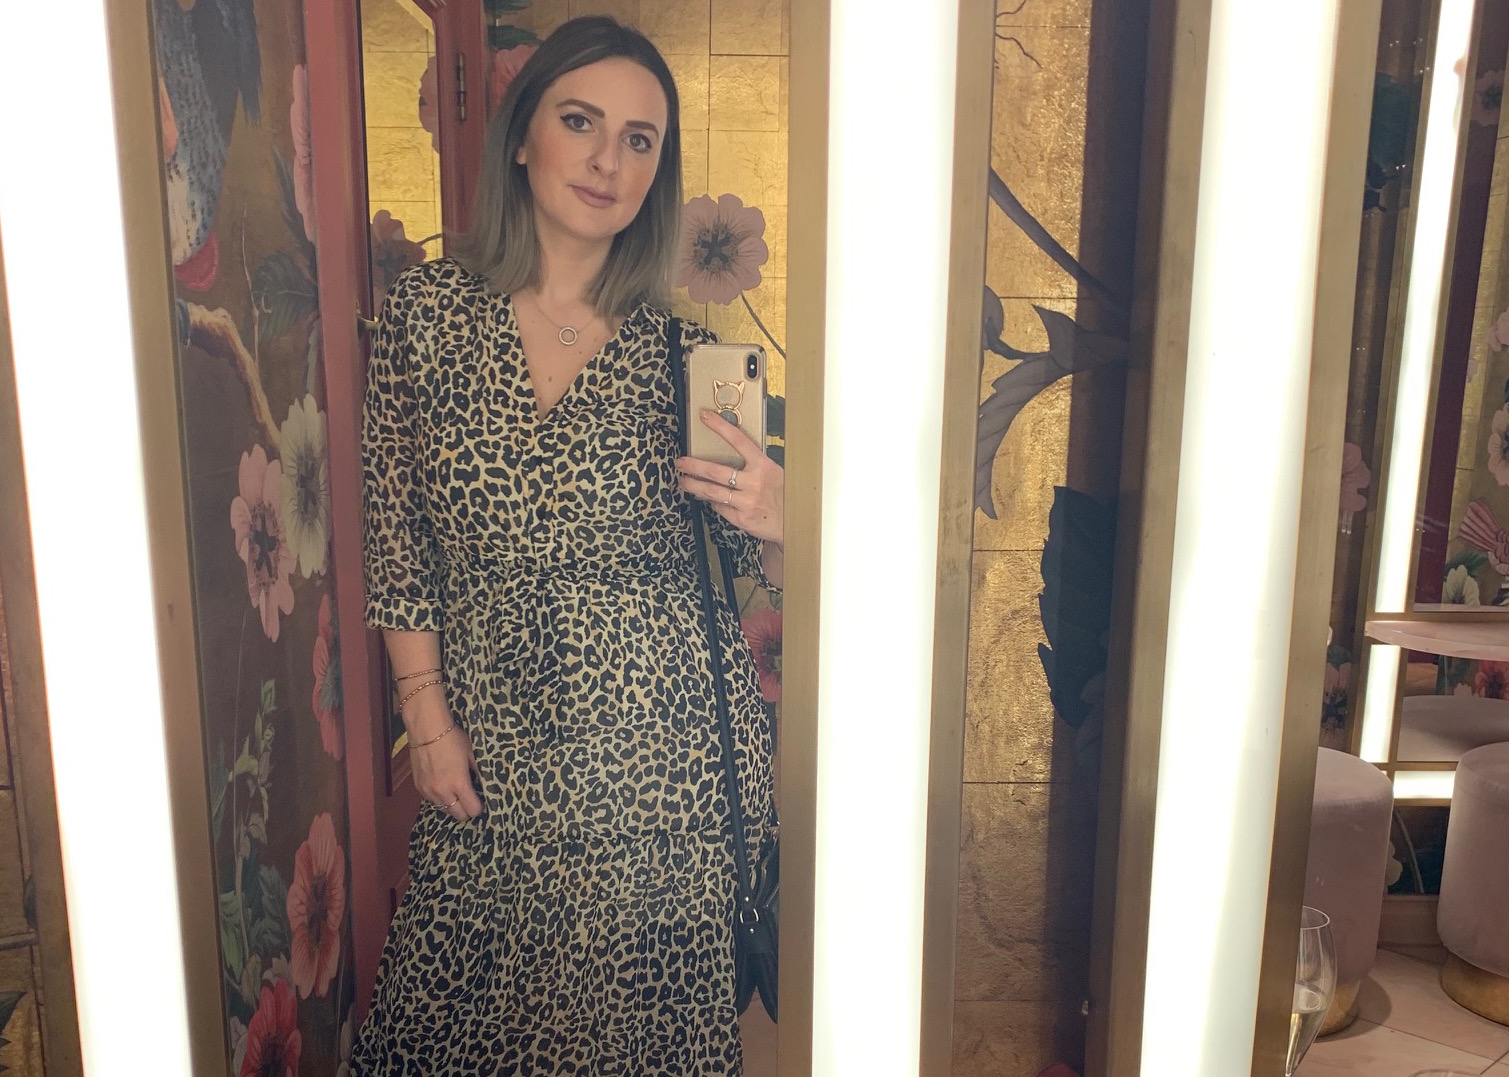 Fashion in my thirties – 3 tips to find your fashion groove